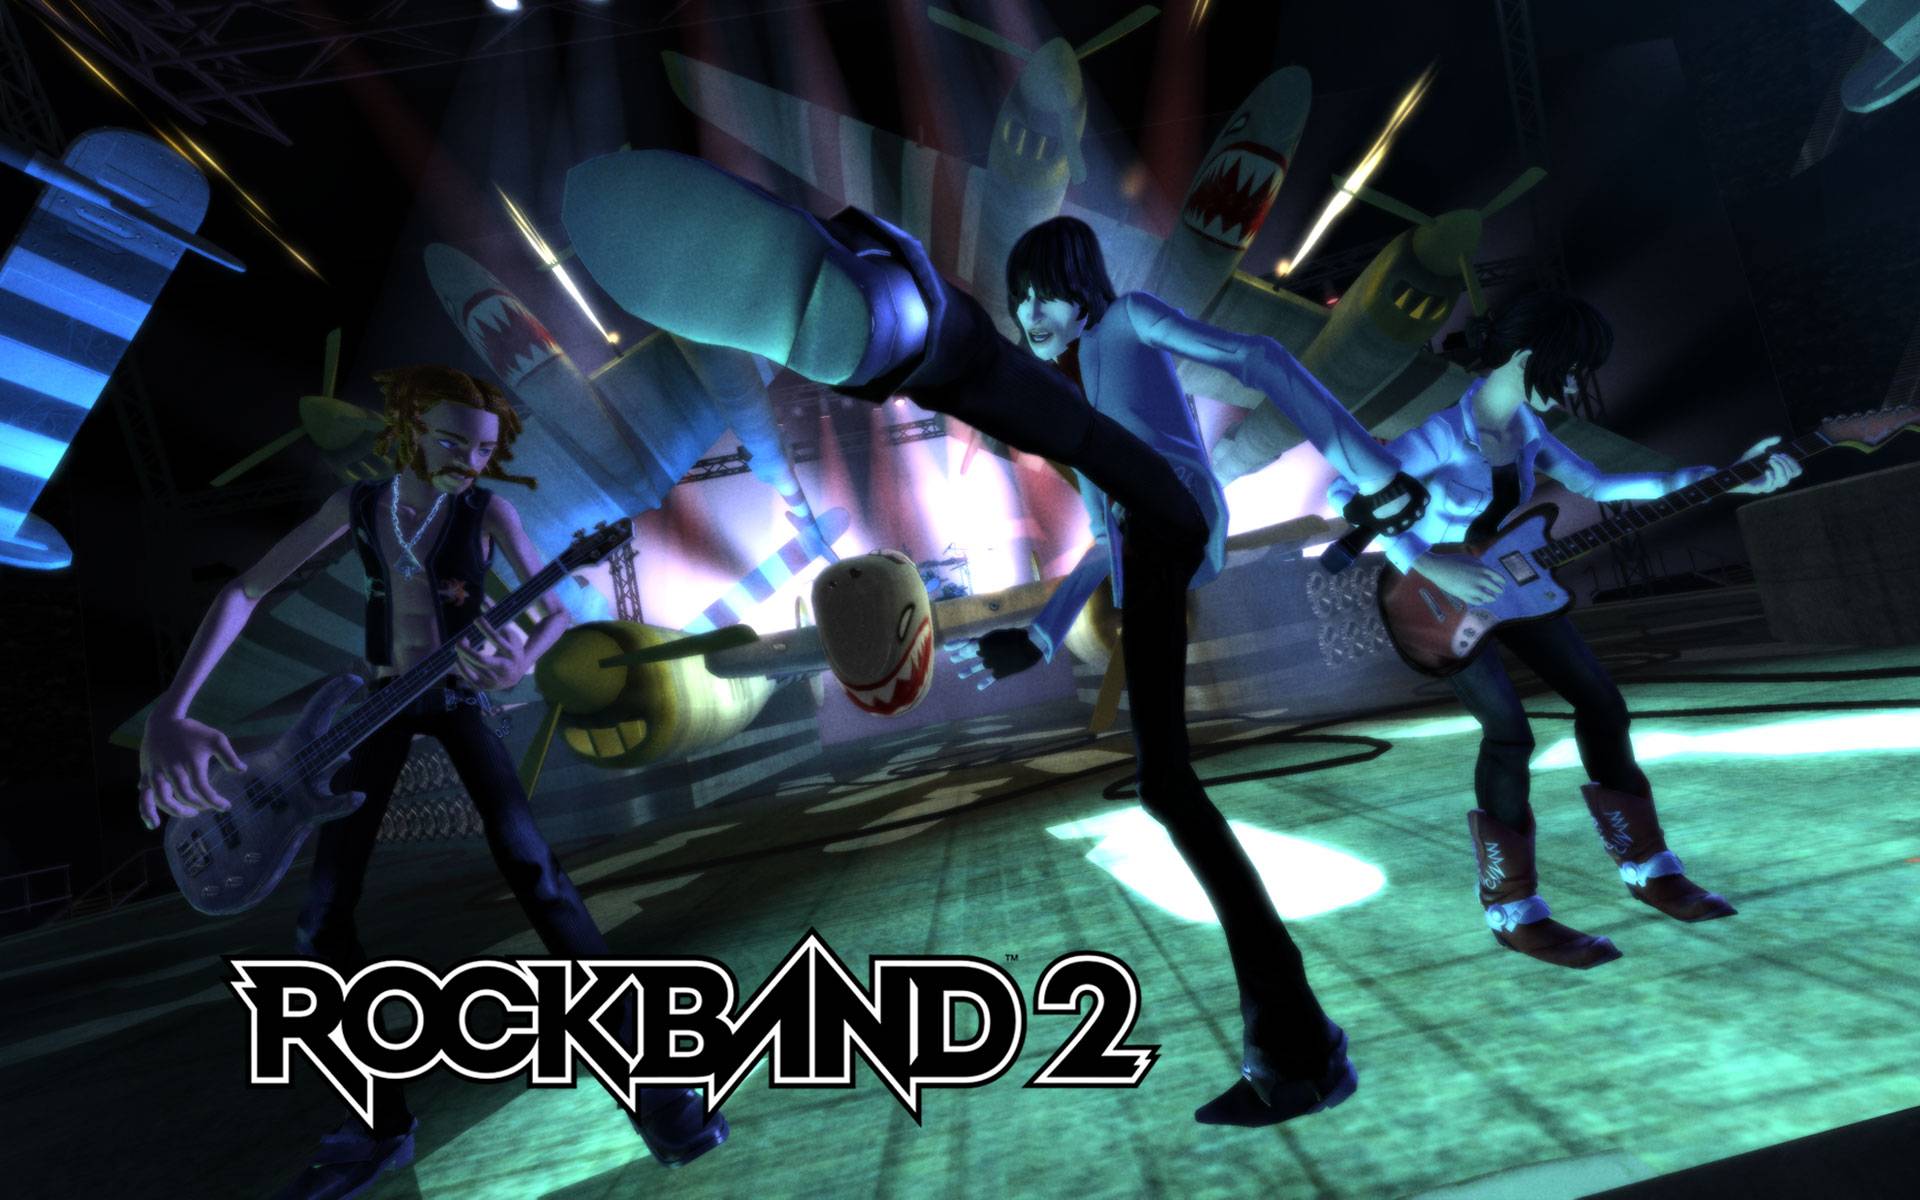 Rockband22 Gallery Content Country Backgrounds